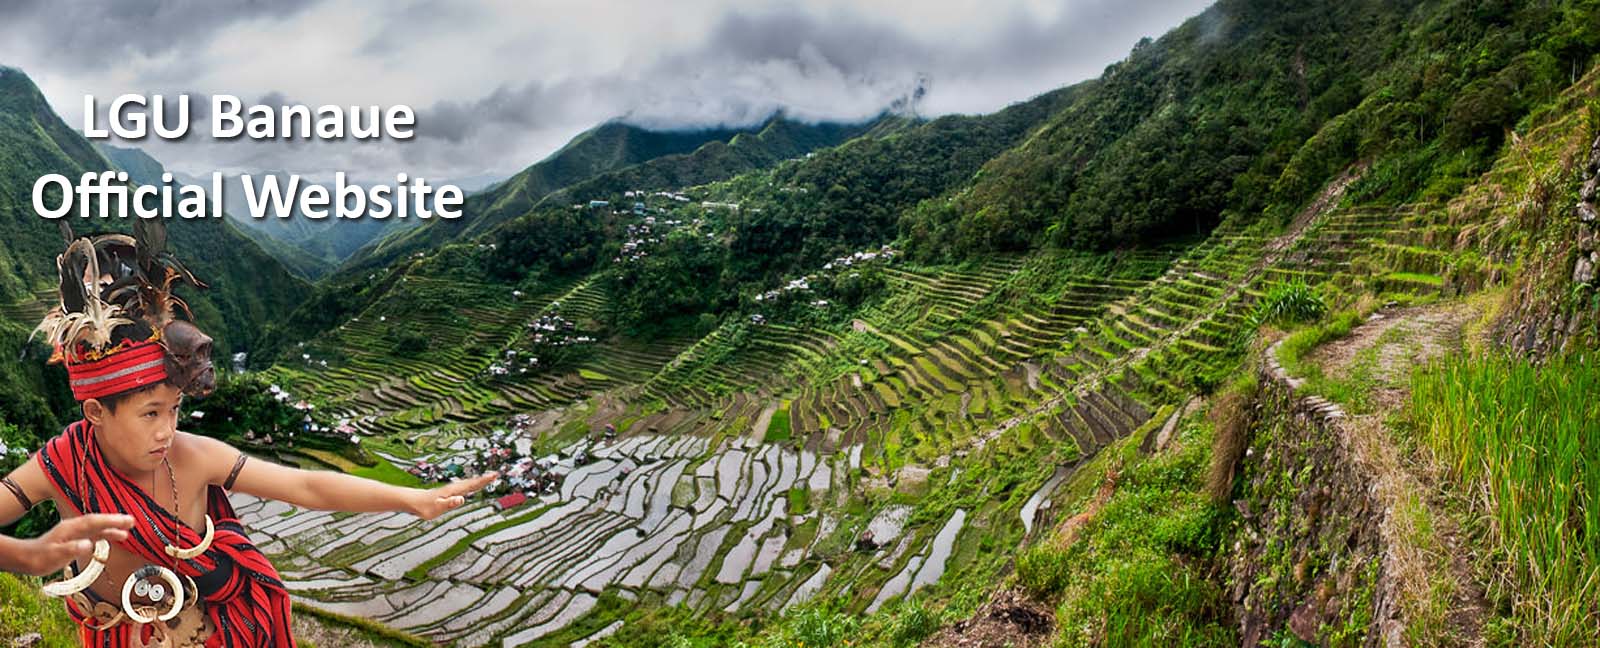 Local Government of Banaue